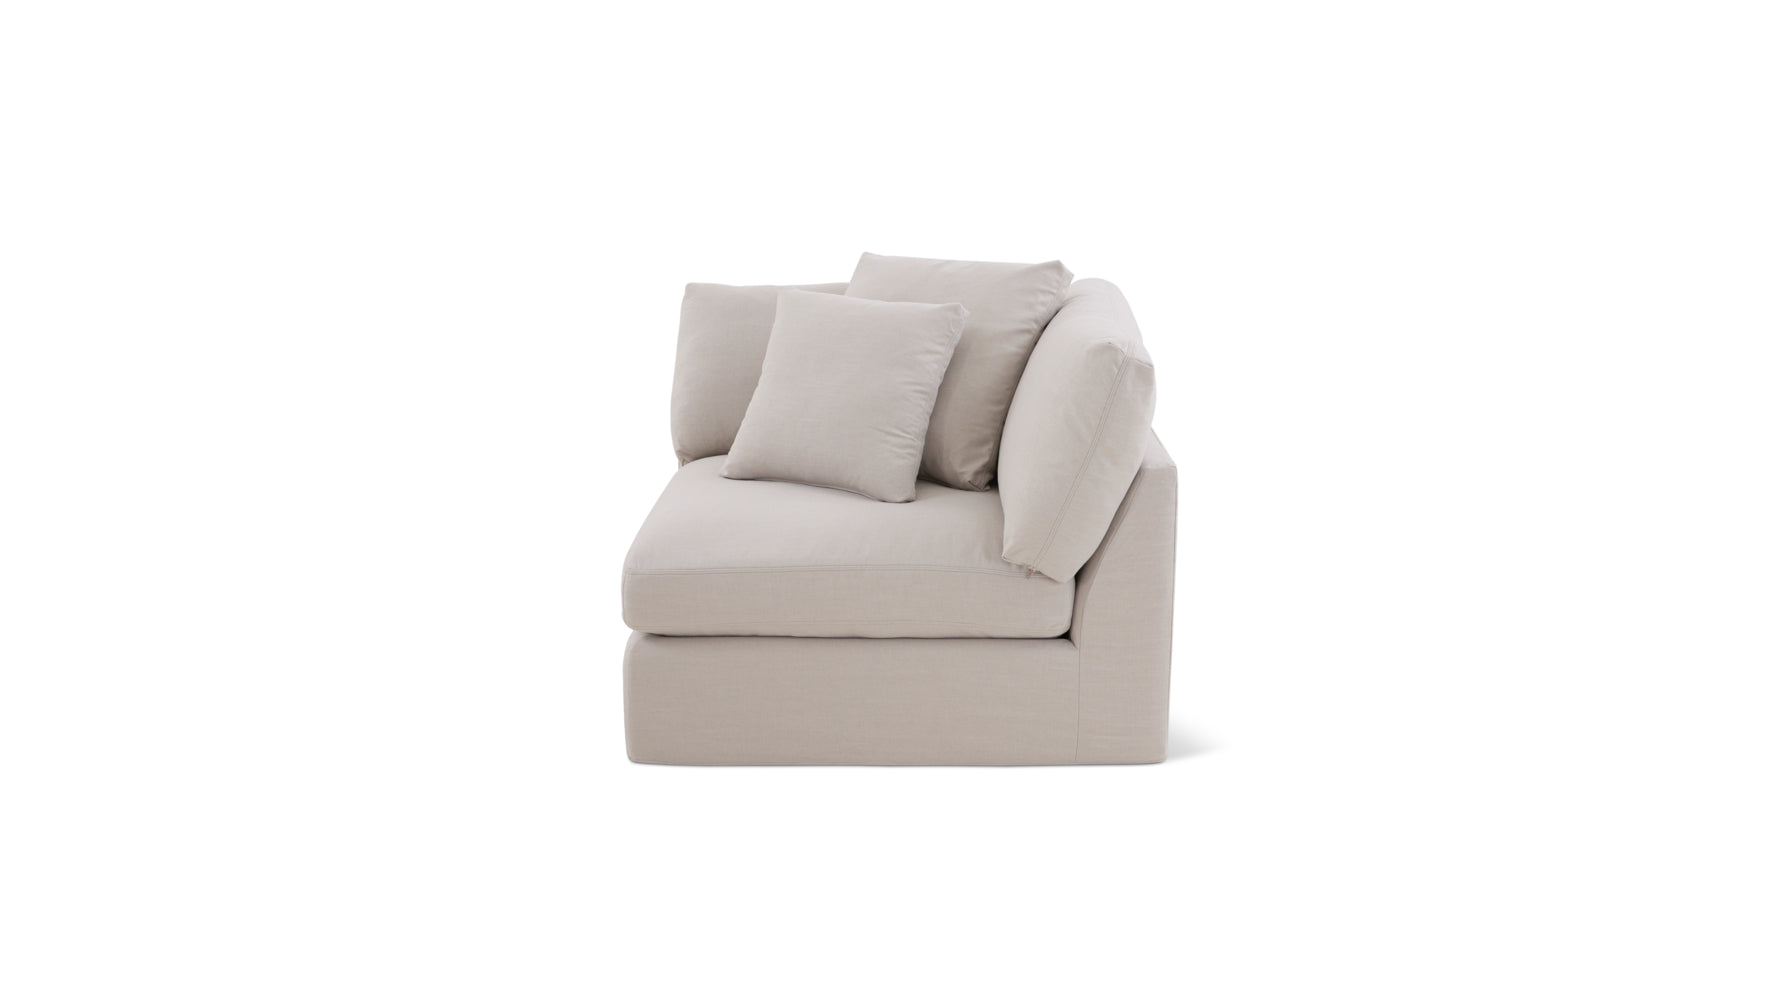 Slipcover - Get Together™ Corner Chair, Large, Clay (Left Or Right) - Image 2